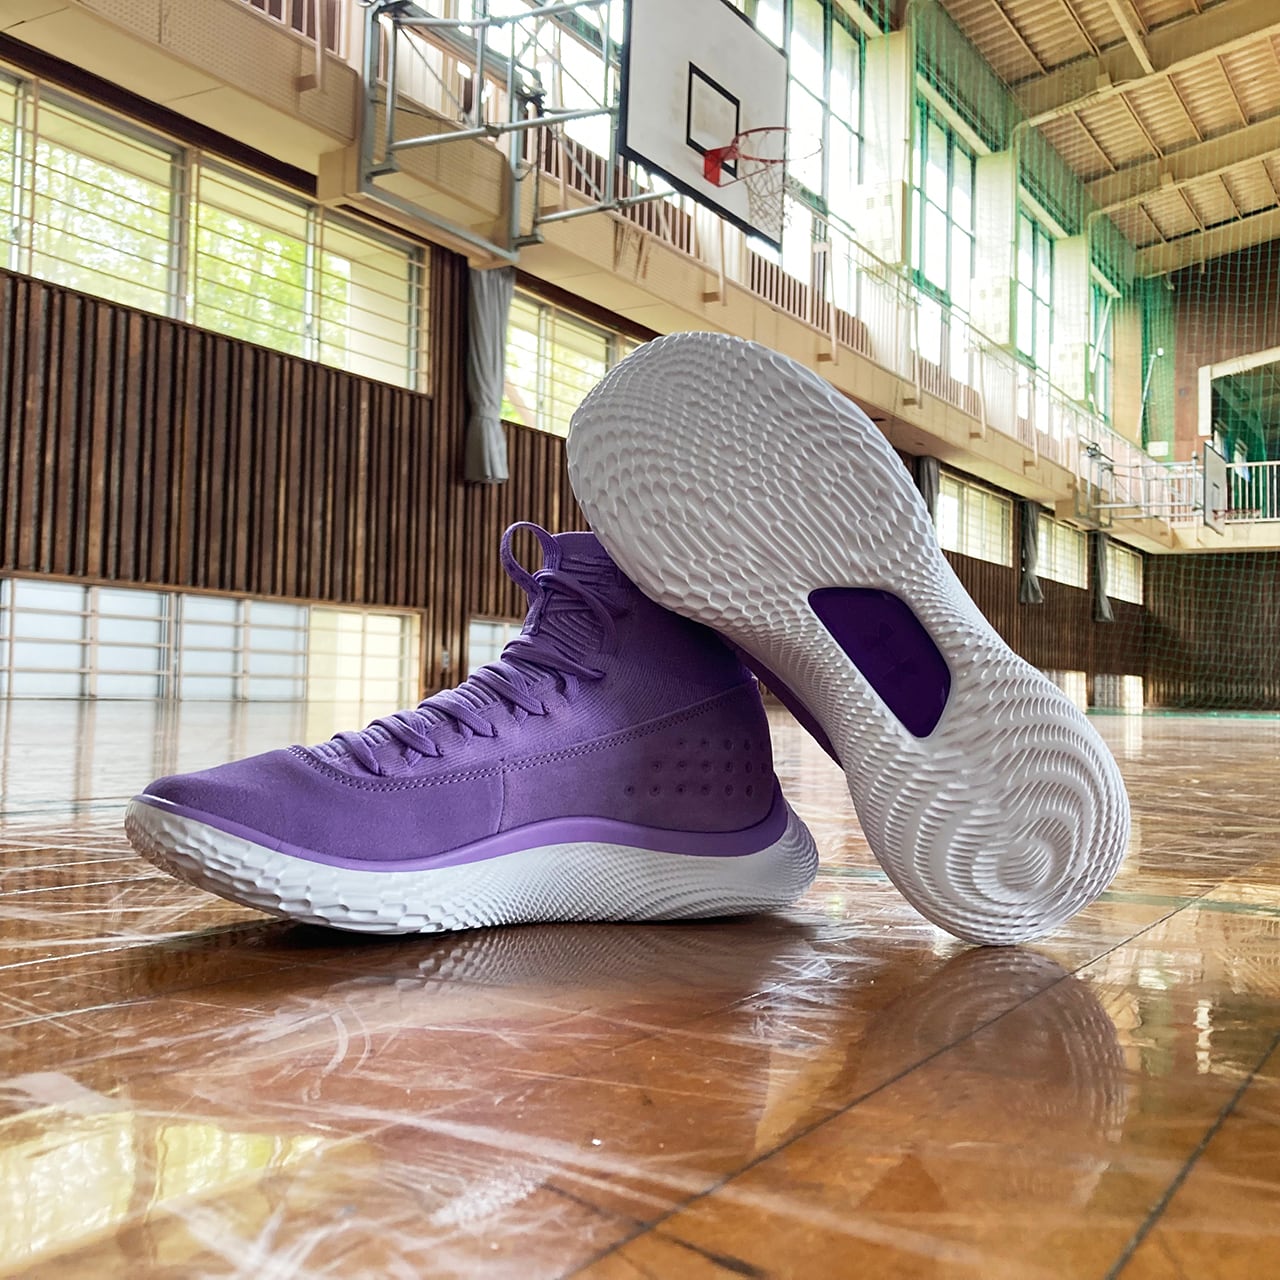 Under Armour Curry 4 Flotro アンダーアーマー カリー4 フロトロ